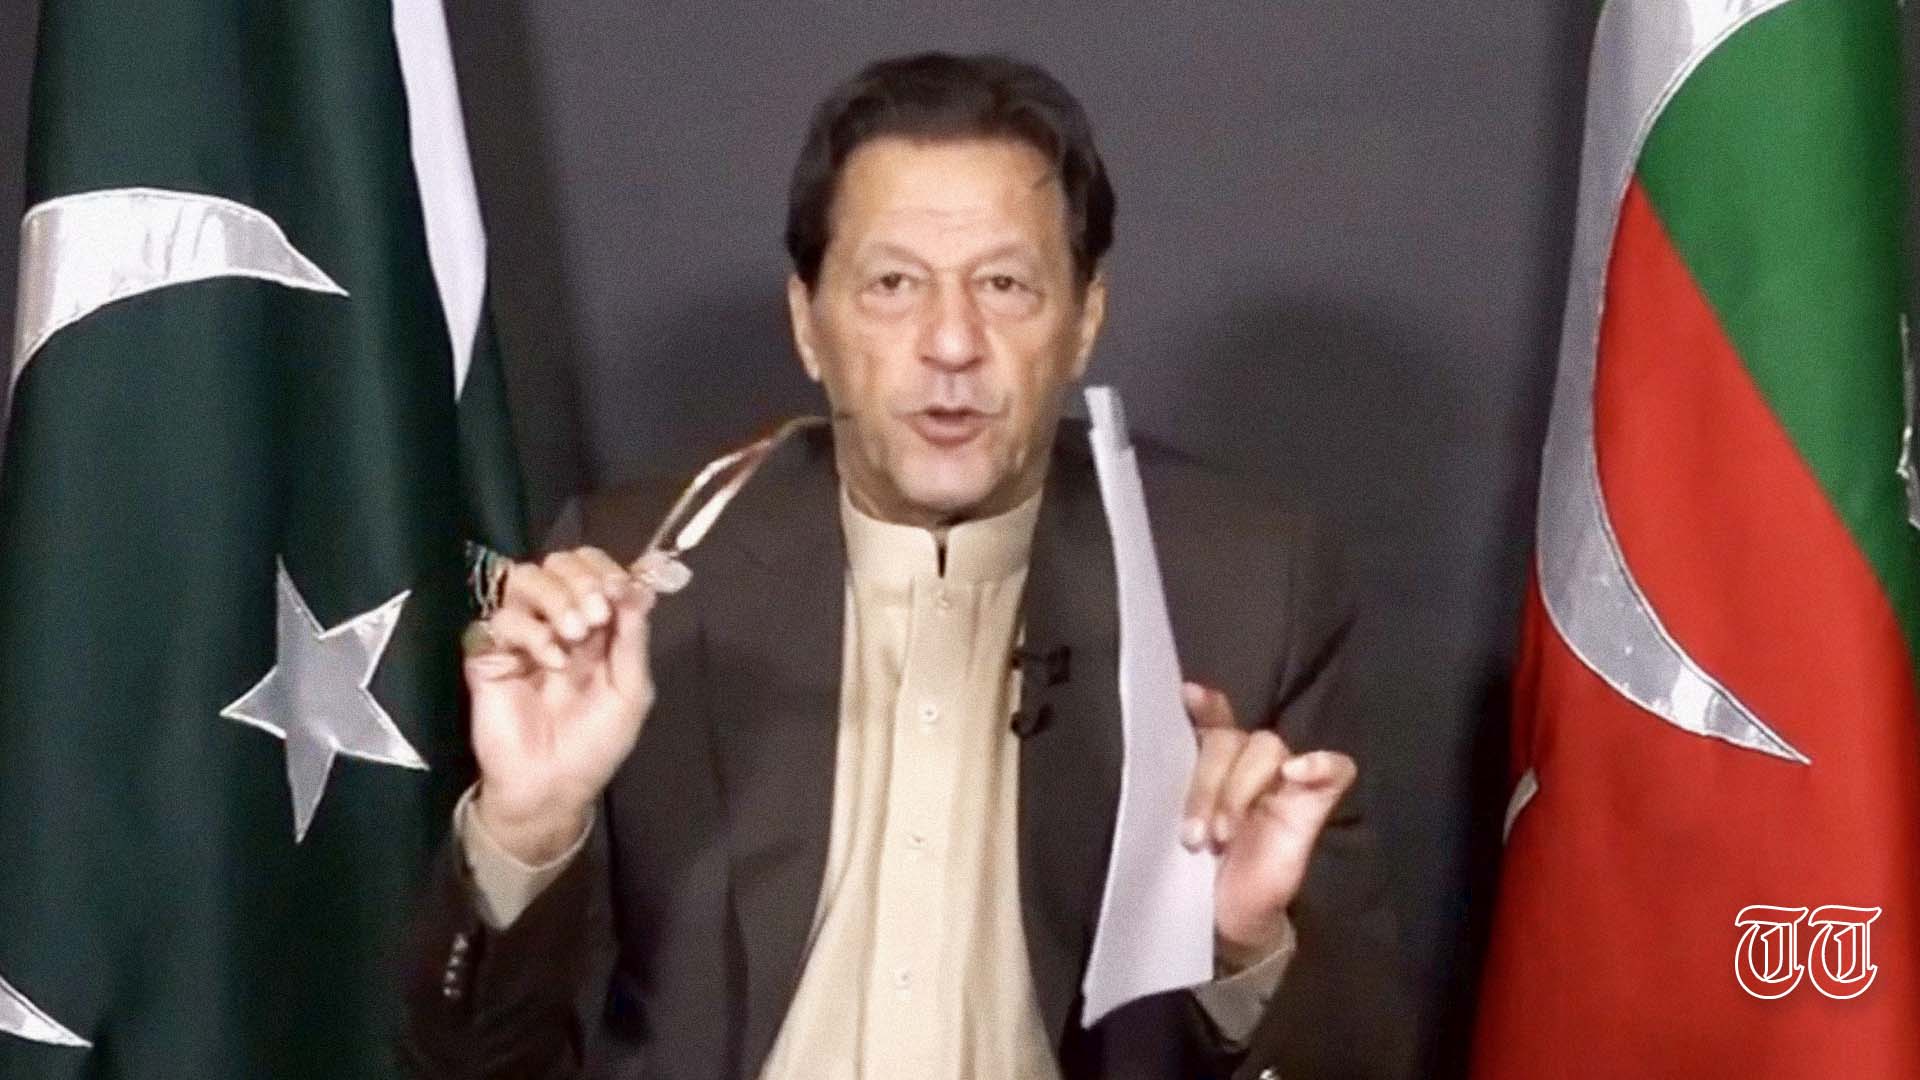 A file photo is shown of Imran Khan from the 11th of December.